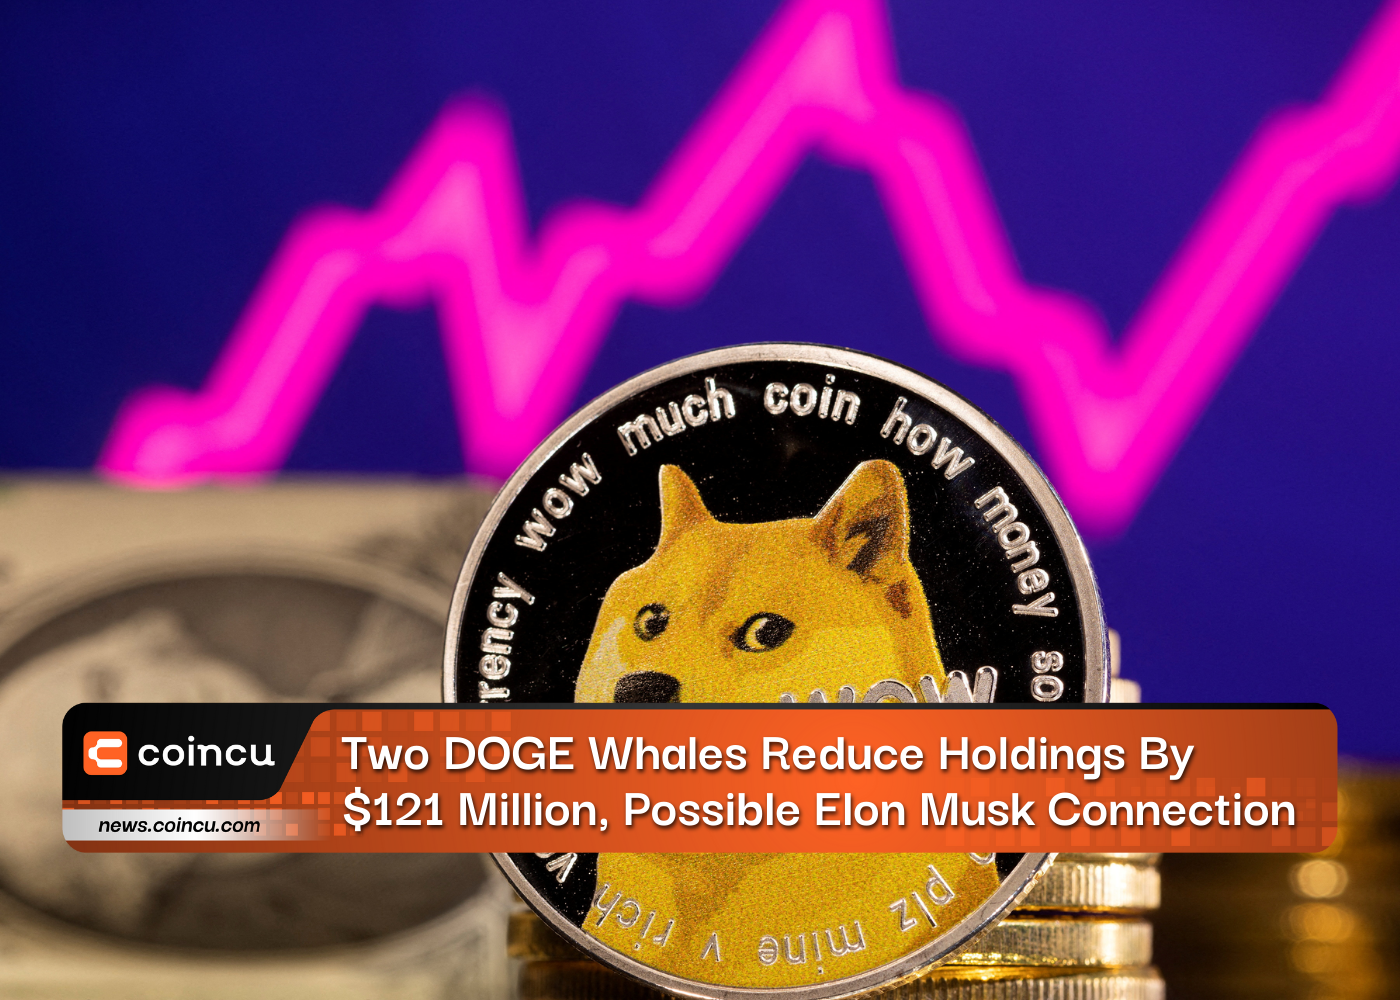 Two DOGE Whales Reduce Holdings By $121 Million, Possible Elon Musk Connection